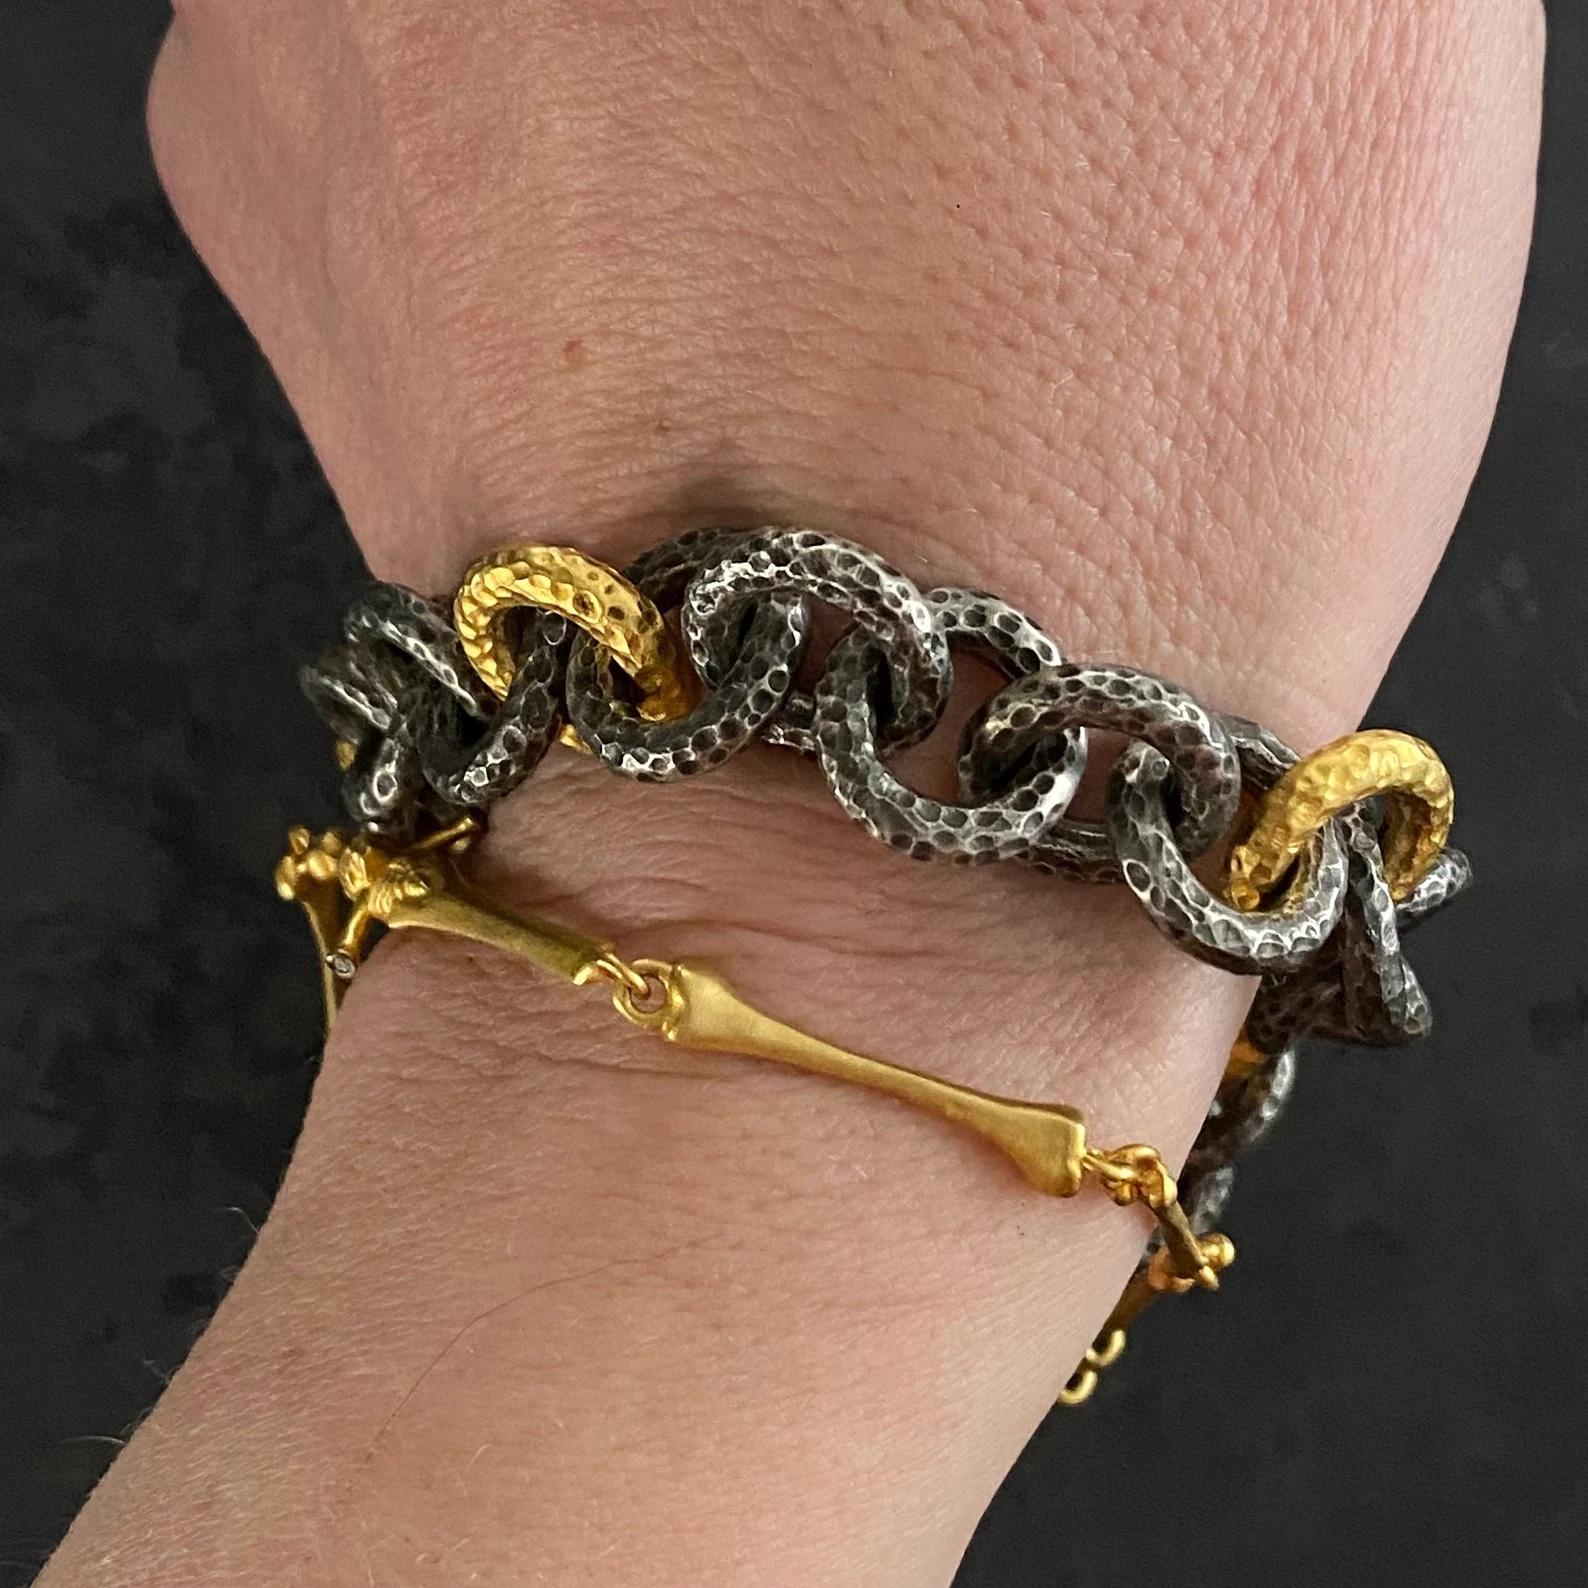 Large, Hammered, Silver and 24kt Yellow Gold Link Bracelet with Diamond Toggle Clasp, by Kurtulan Jewellery of Istanbul, Turkey, Size: 9 inches in length. 
Bracelet:
Length - 9